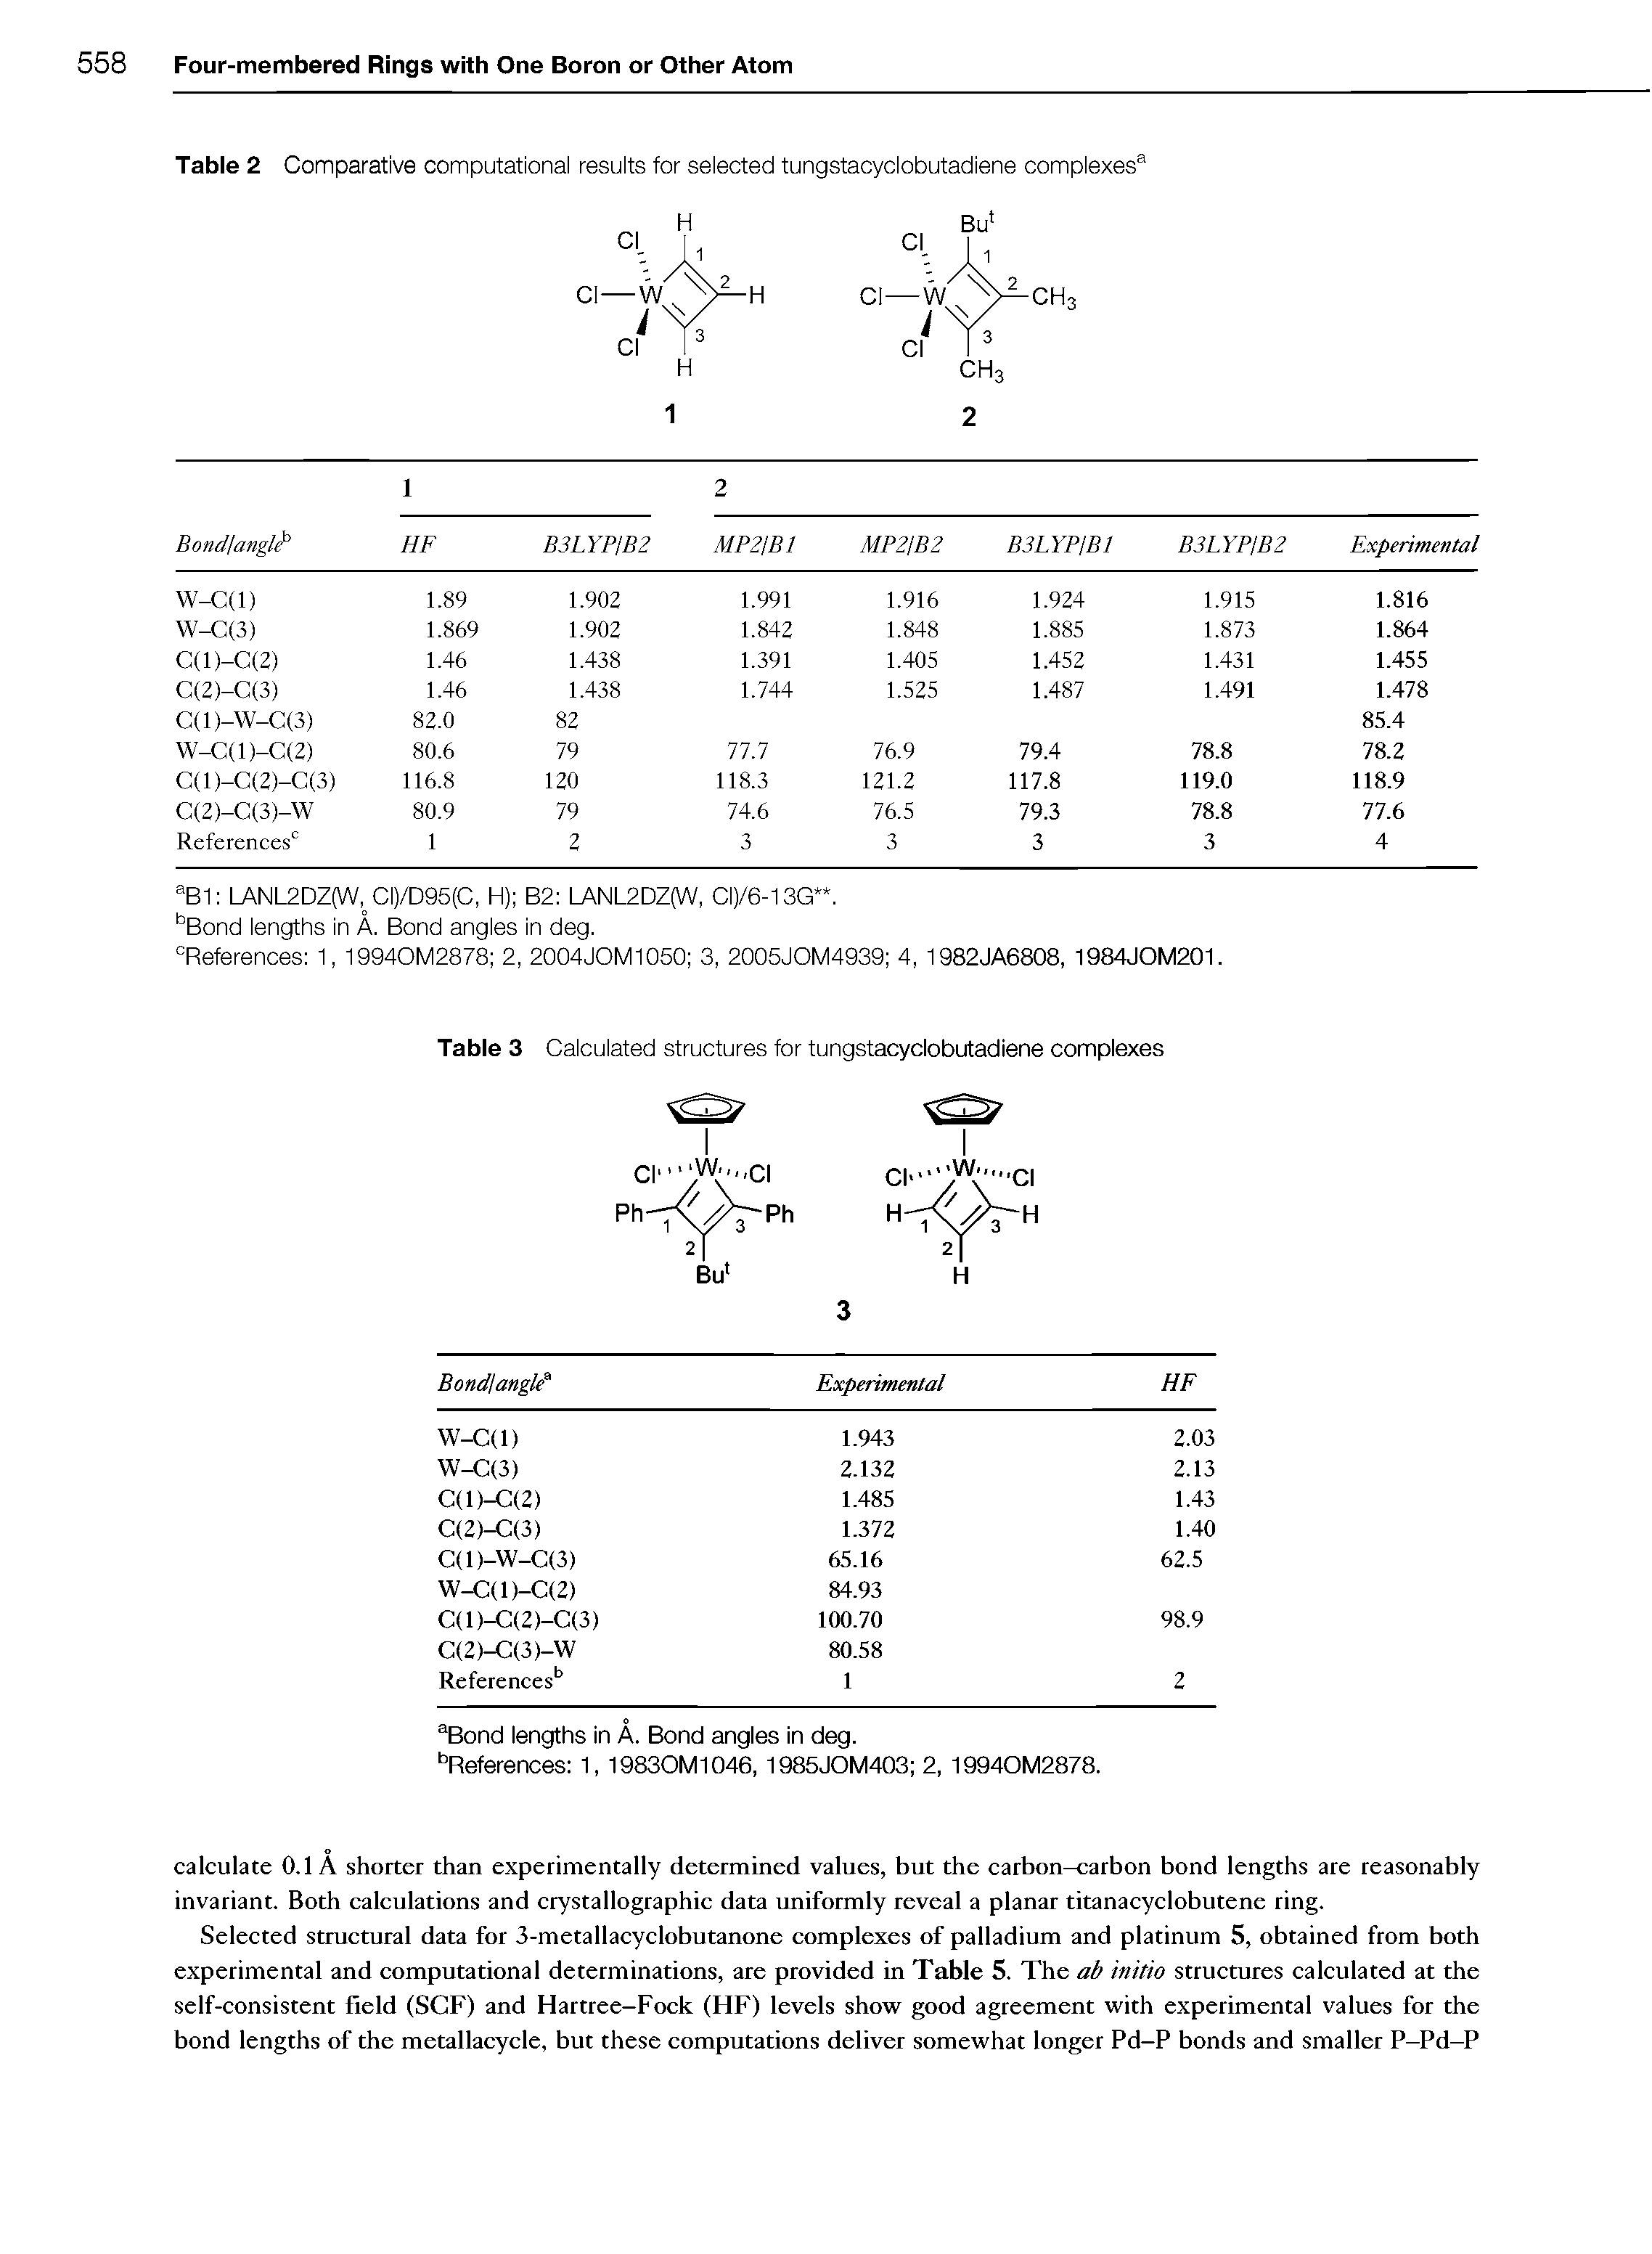 Table 2 Comparative computational results for selected tungstacyclobutadiene complexes ...